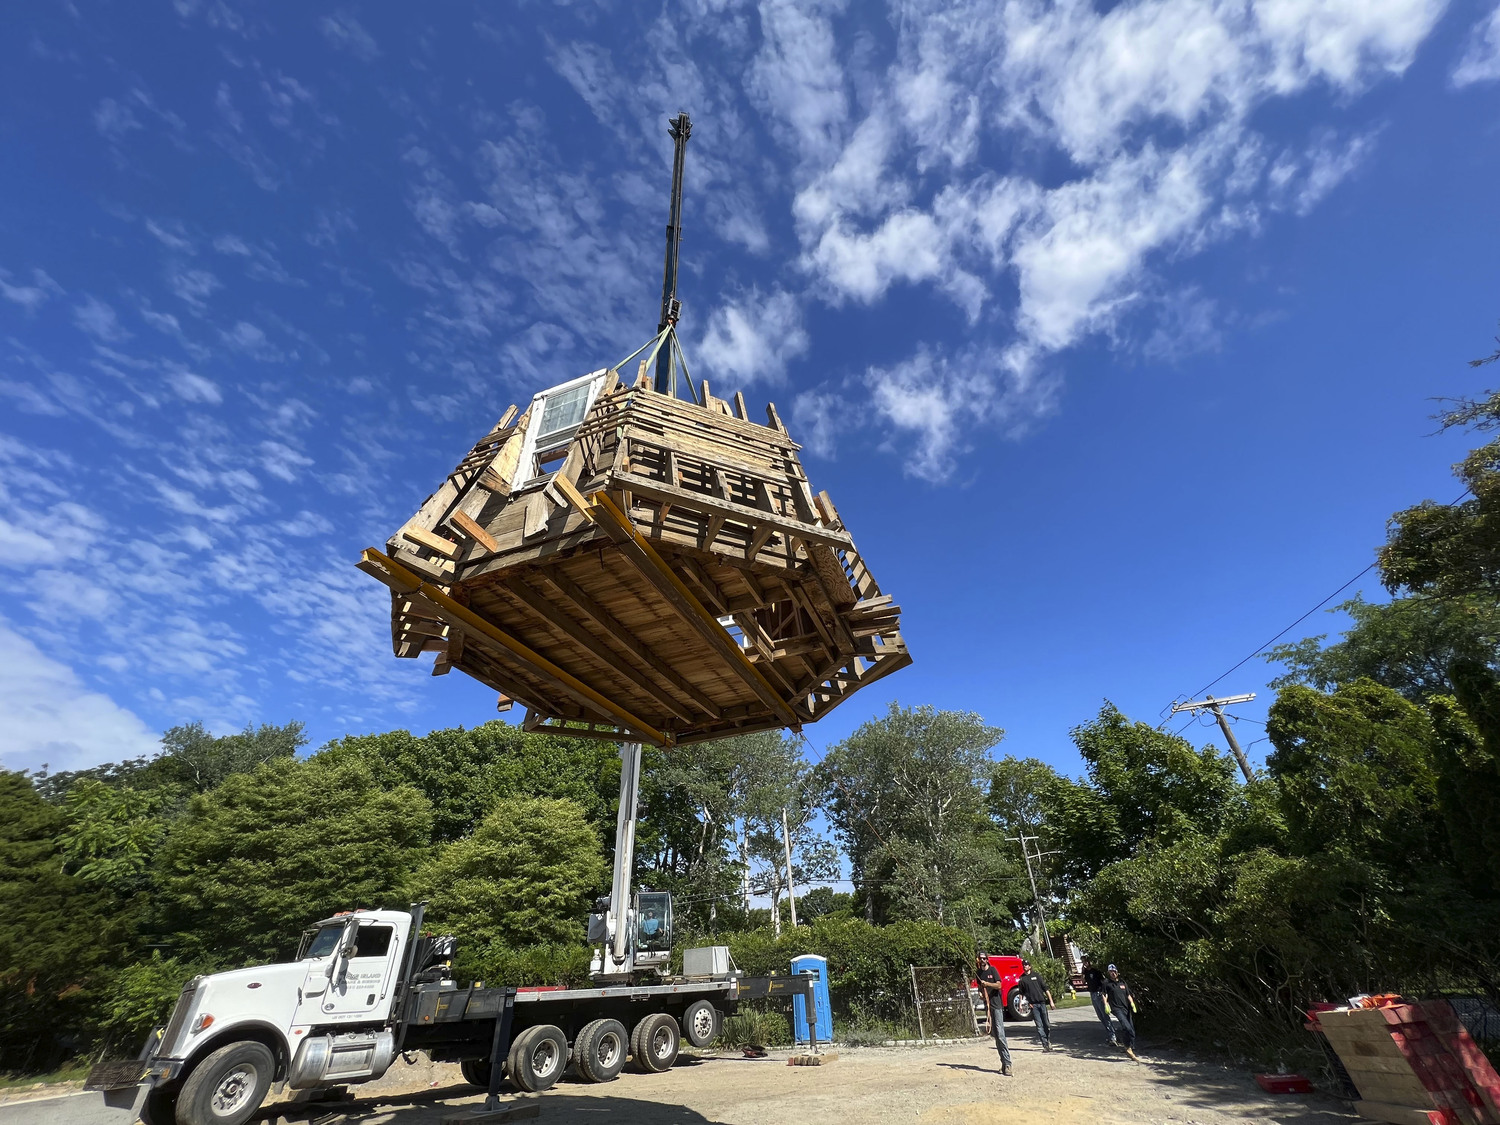 The Dix windmill being moved from its former location to the Great Lawn on July 7, 2022.  DANA SHAW